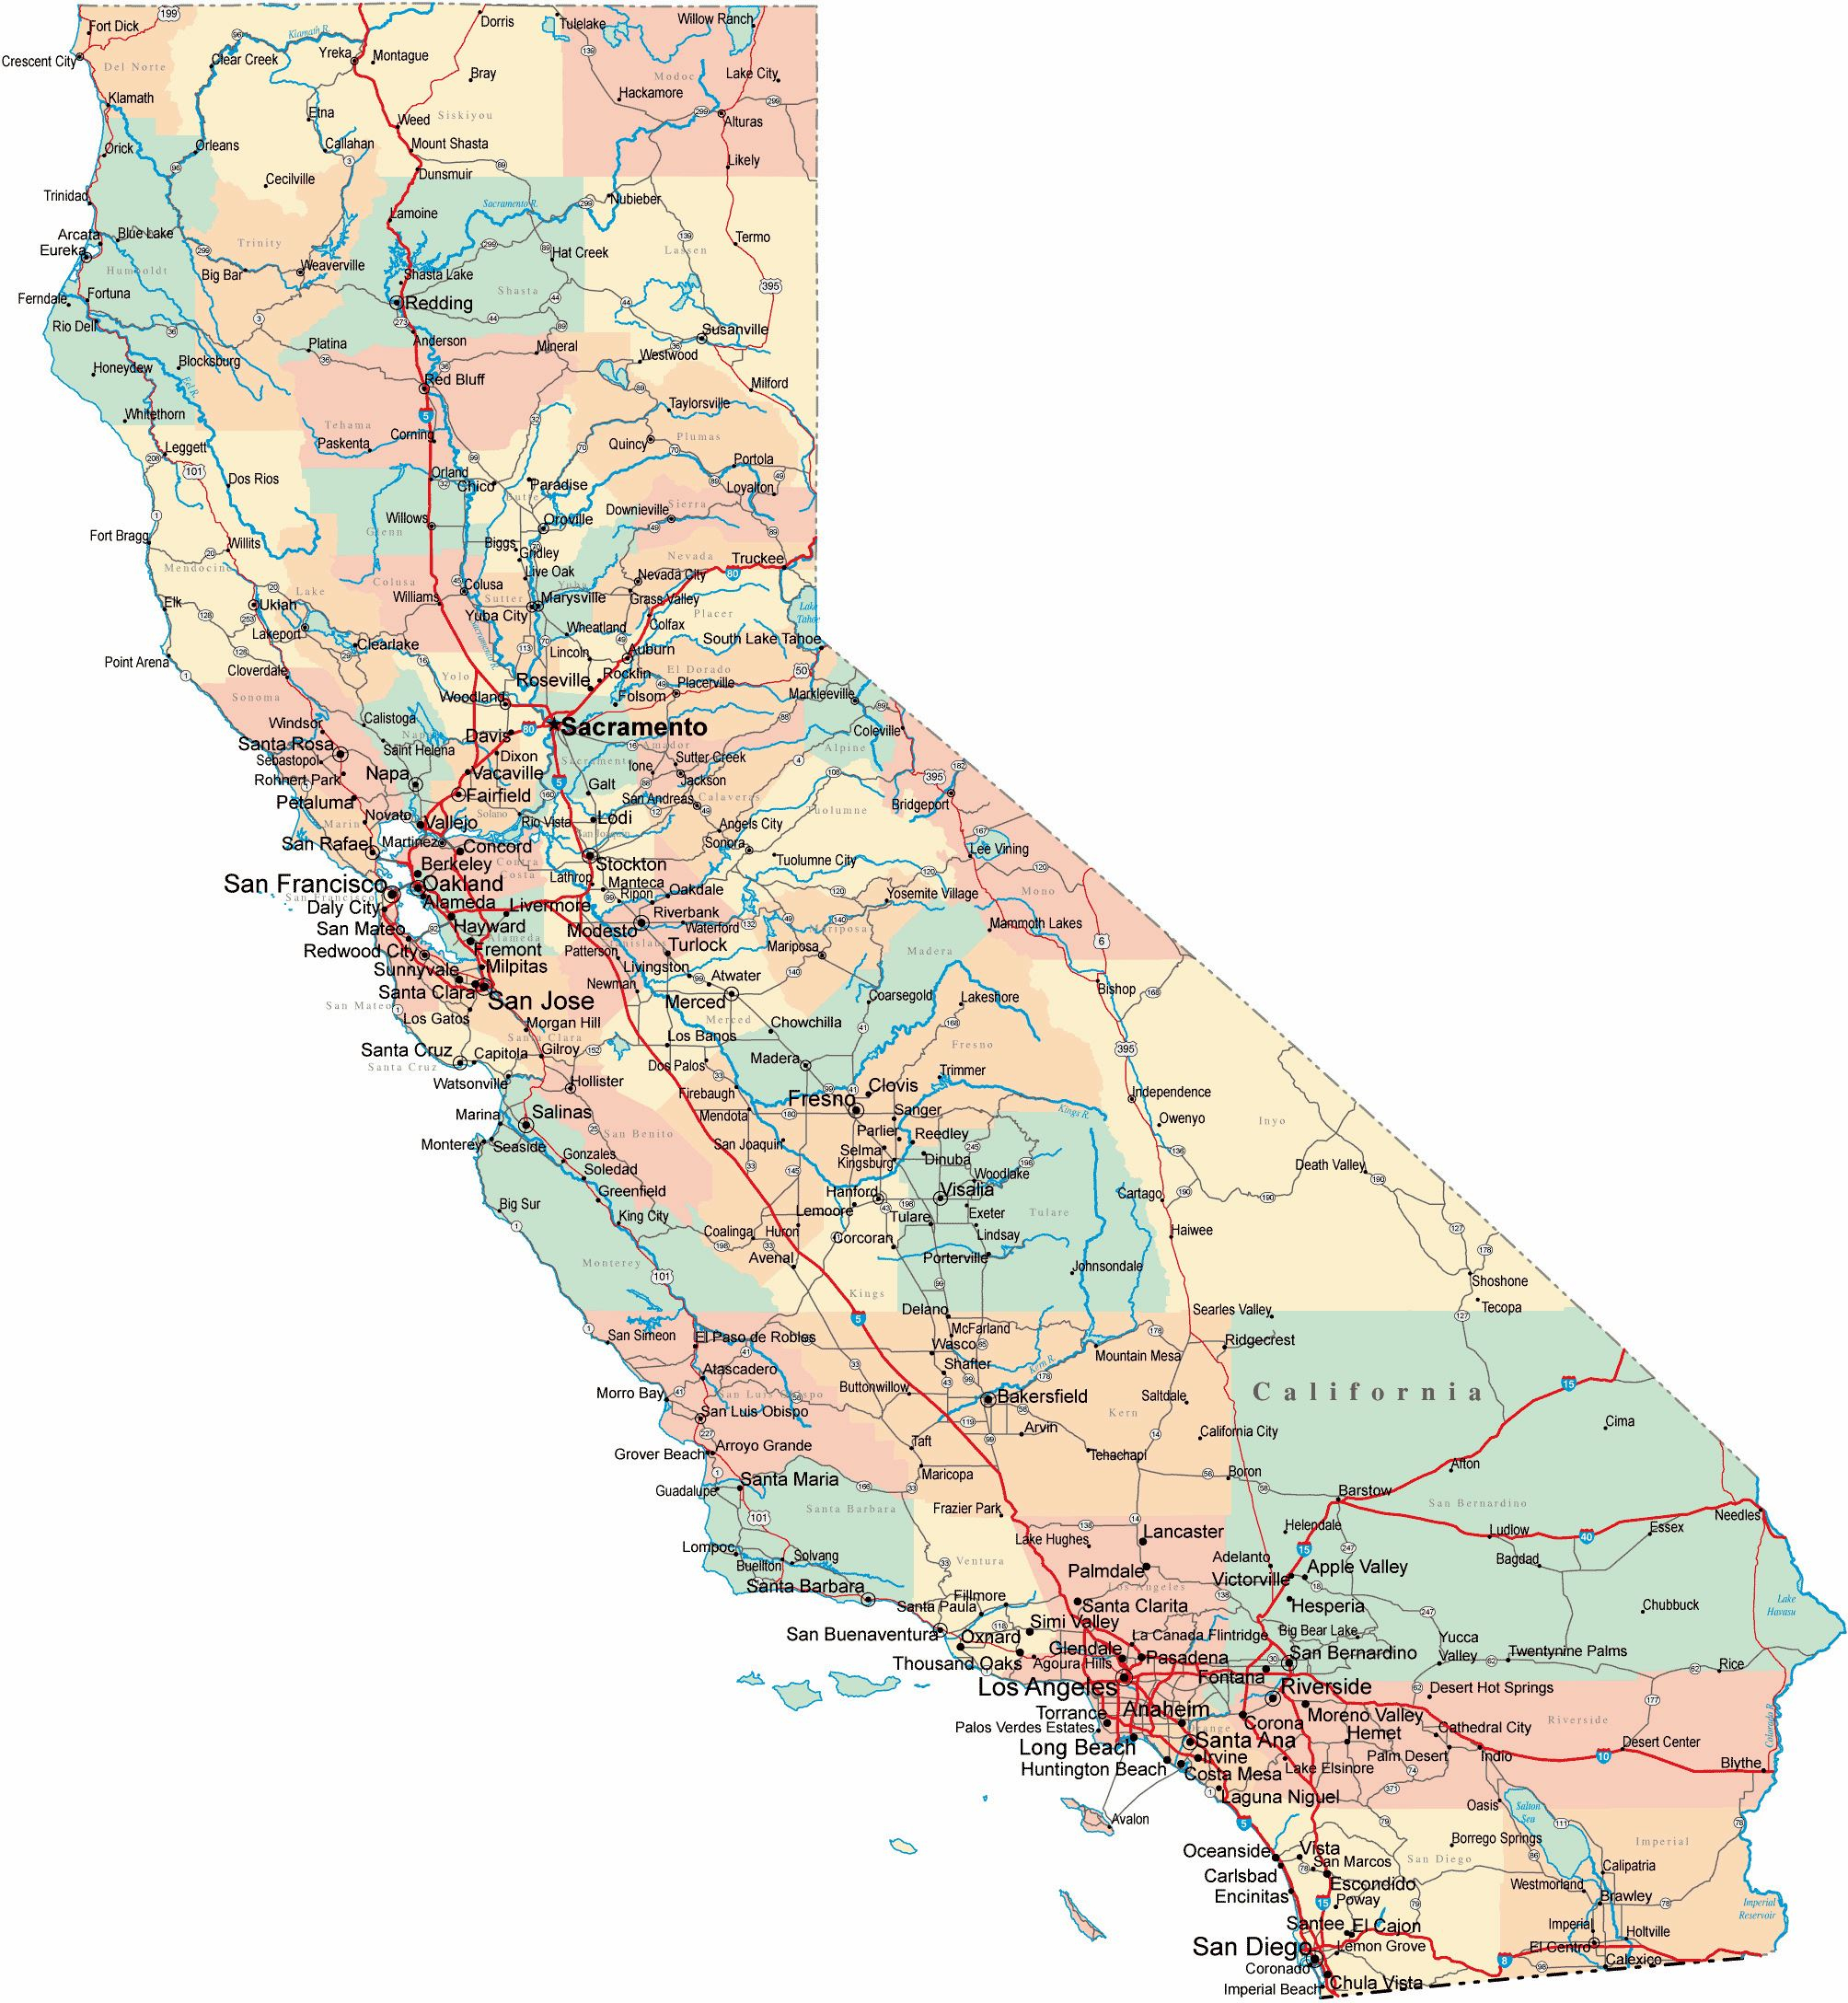 Large California Maps For Free Download And Print | High-Resolution - Map Of California Showing Cities